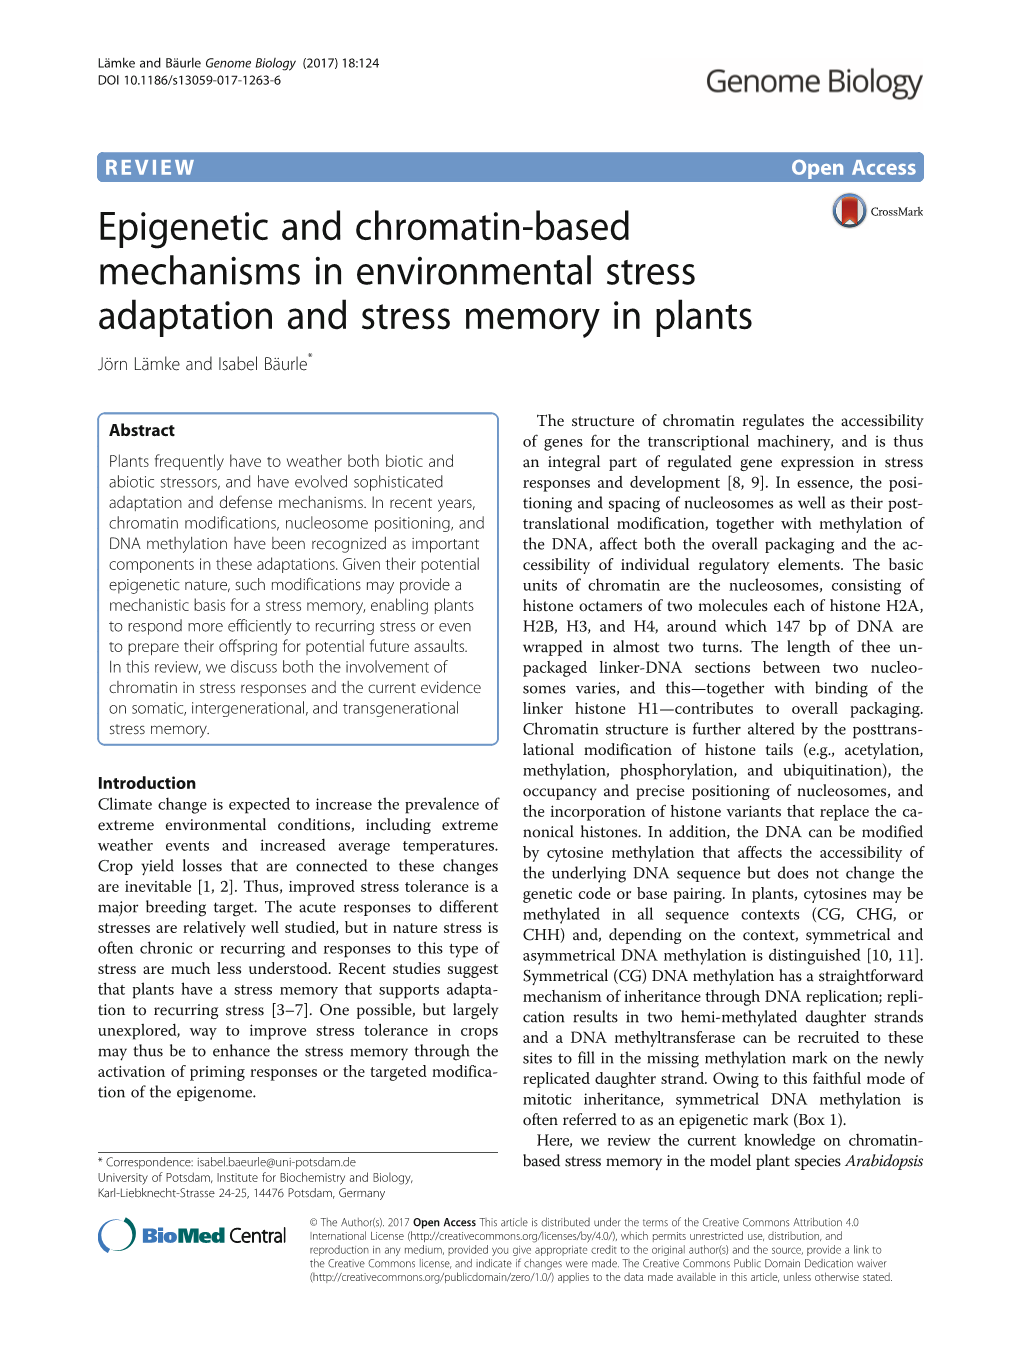 Epigenetic and Chromatin-Based Mechanisms in Environmental Stress Adaptation and Stress Memory in Plants Jörn Lämke and Isabel Bäurle*